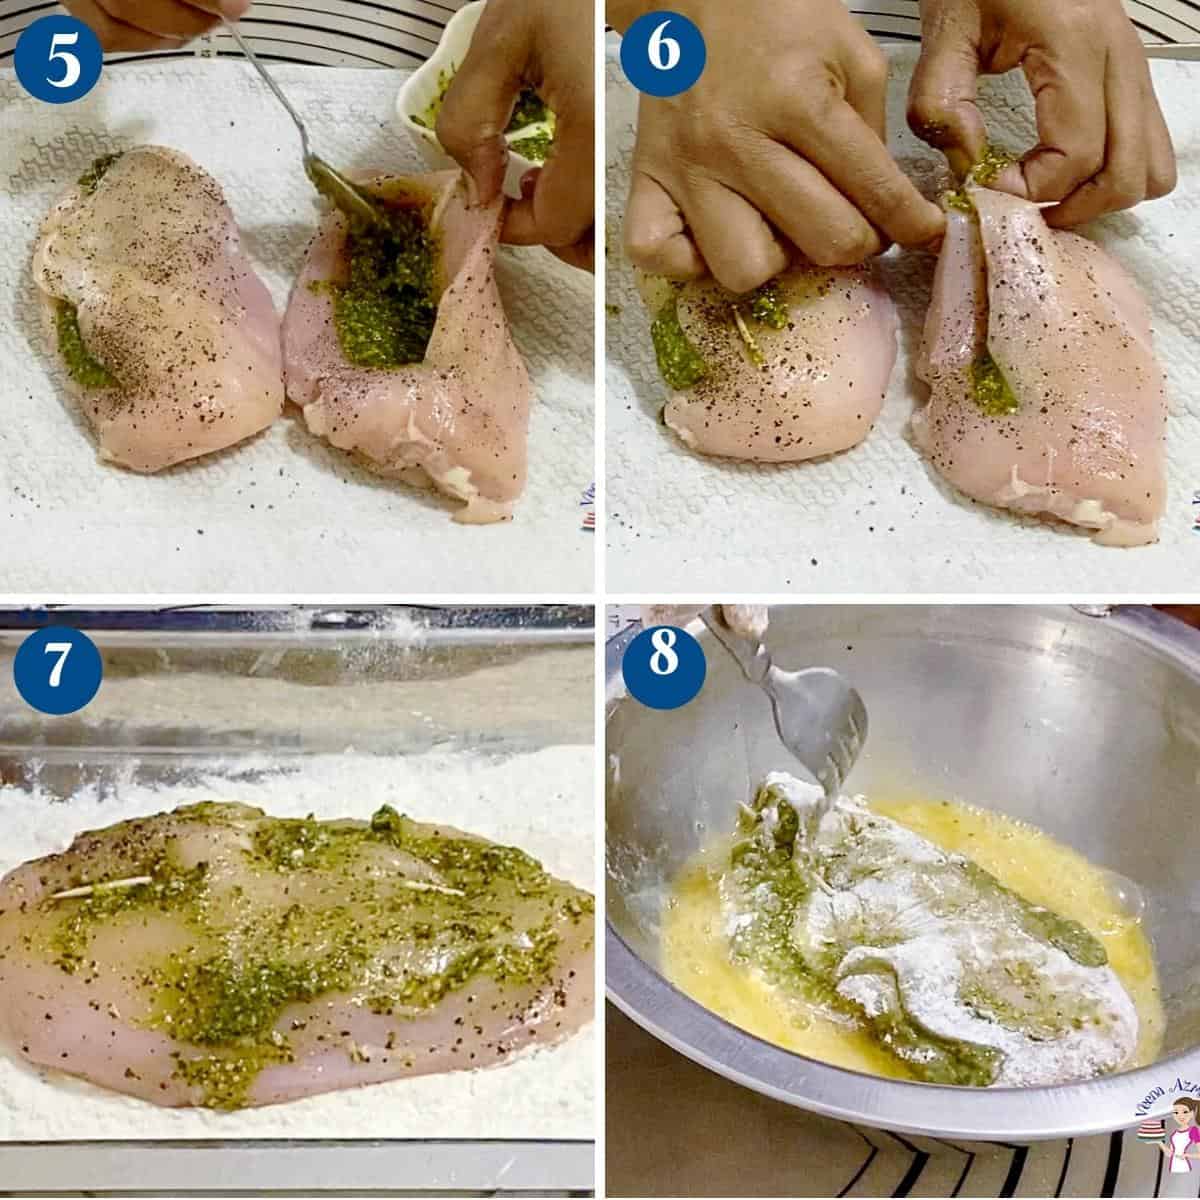 Progress pictures stuffing the chicken breast with pesto.